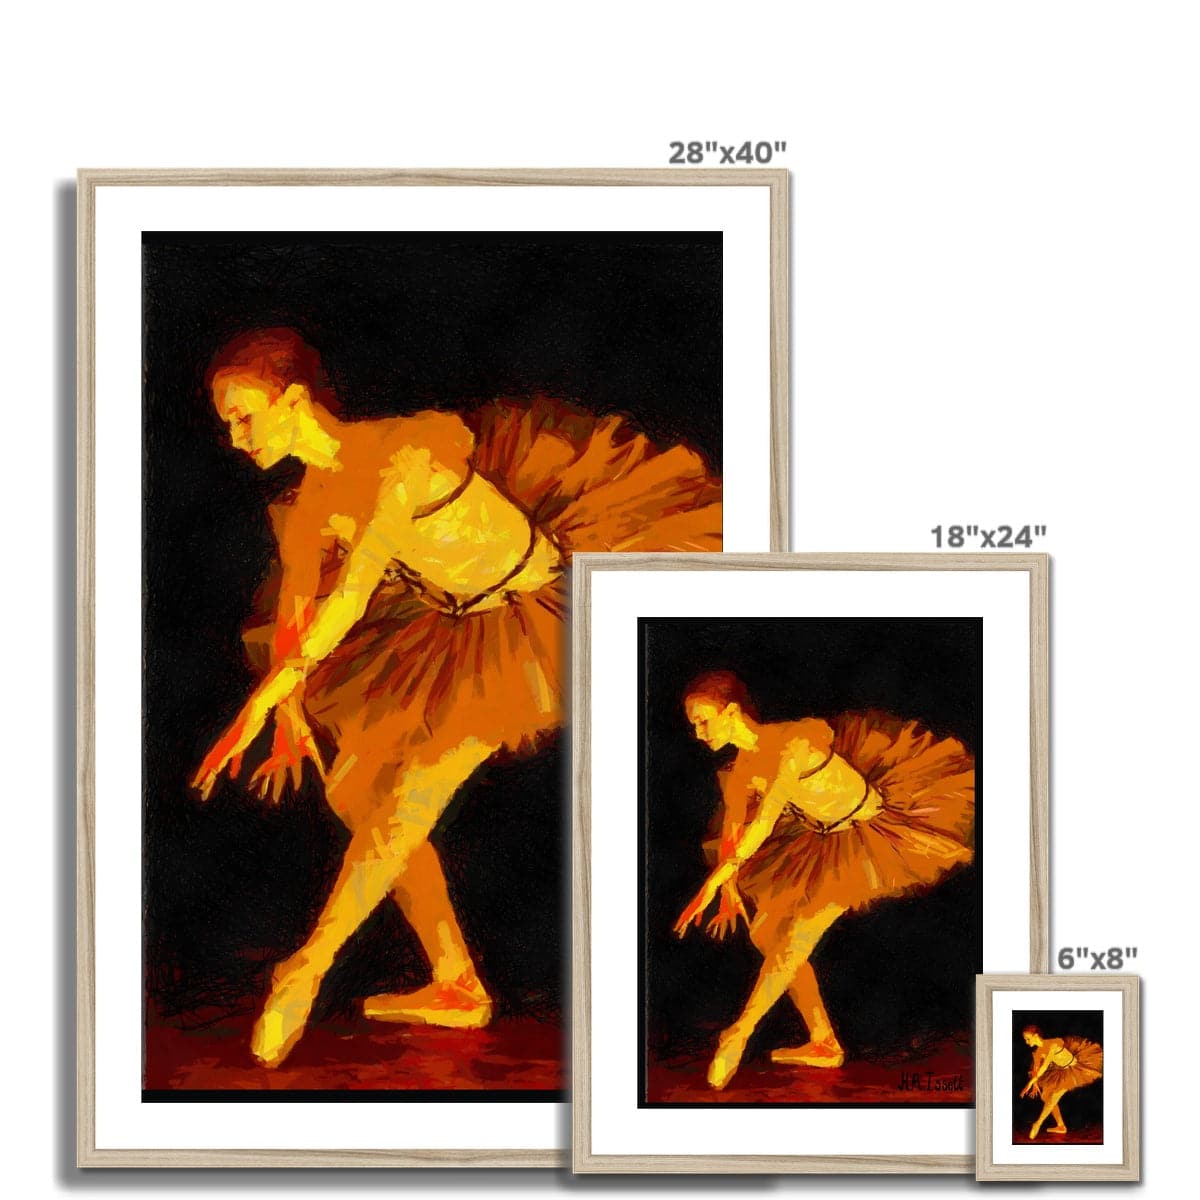 Bowing Ballerina Framed & Mounted Print